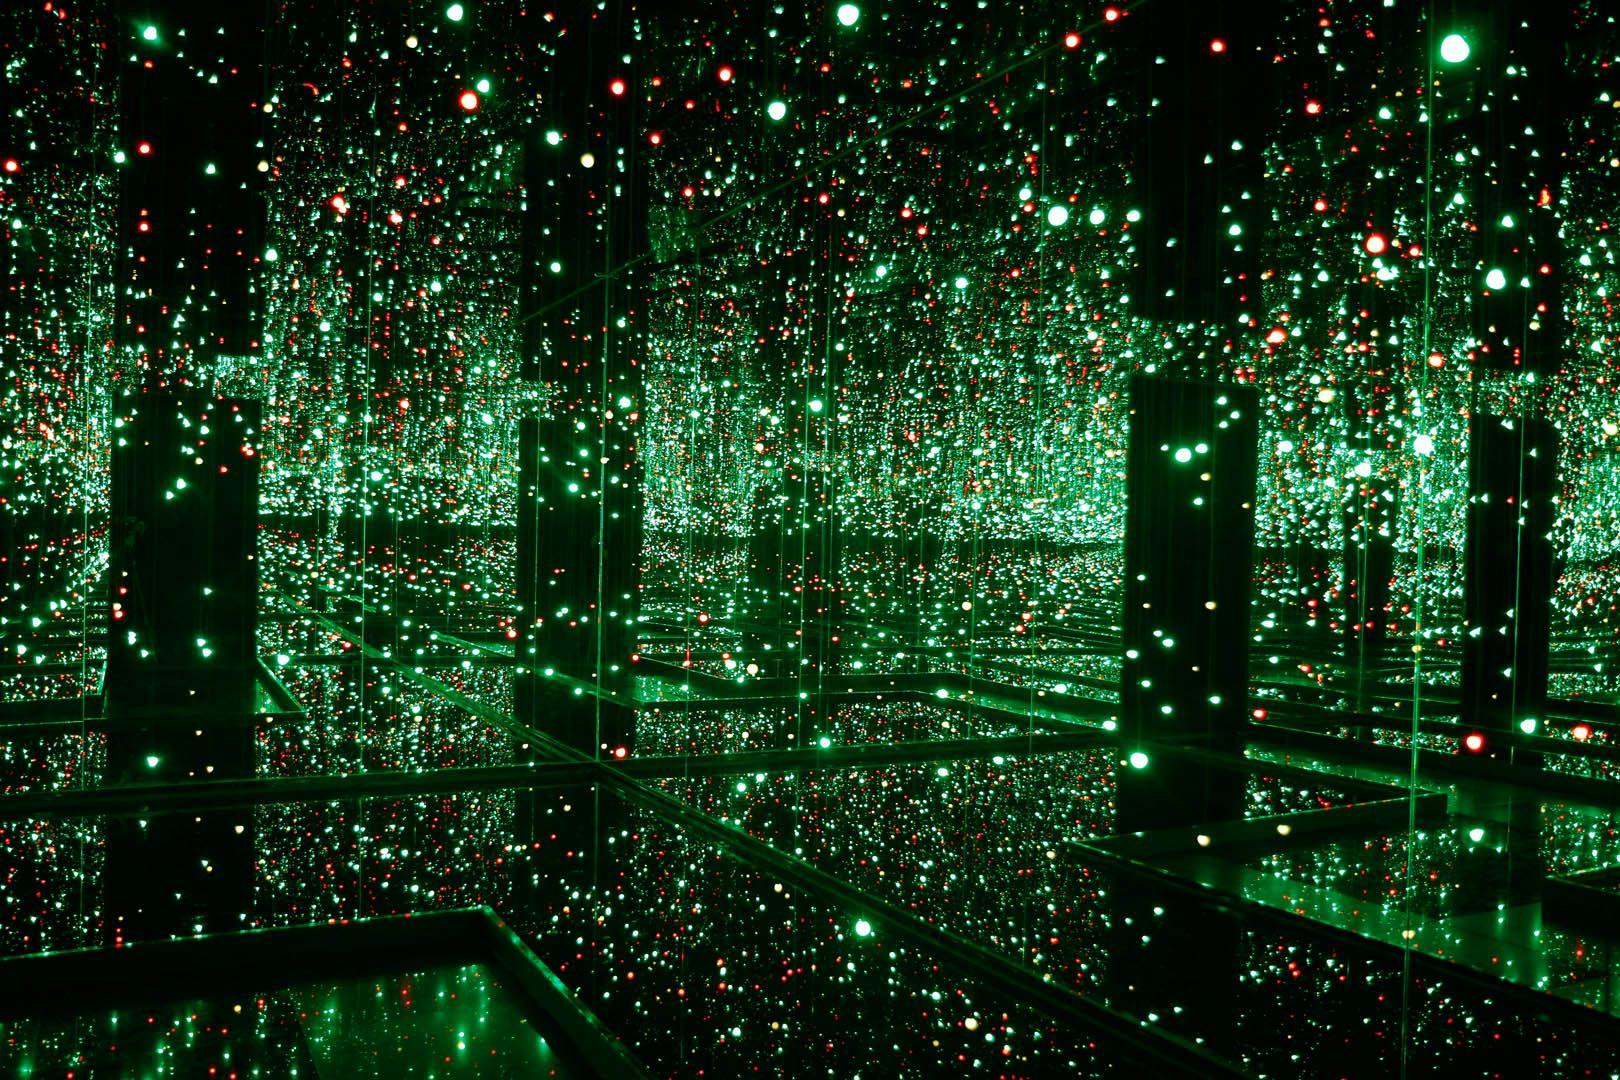 Installation view of¬†Yayoi Kusama's exhibition Infinite Obsession¬†at Museo de Arte Latinoamericano de Buenos Aires- Fundaci√≥n Costantini, dated 2013.